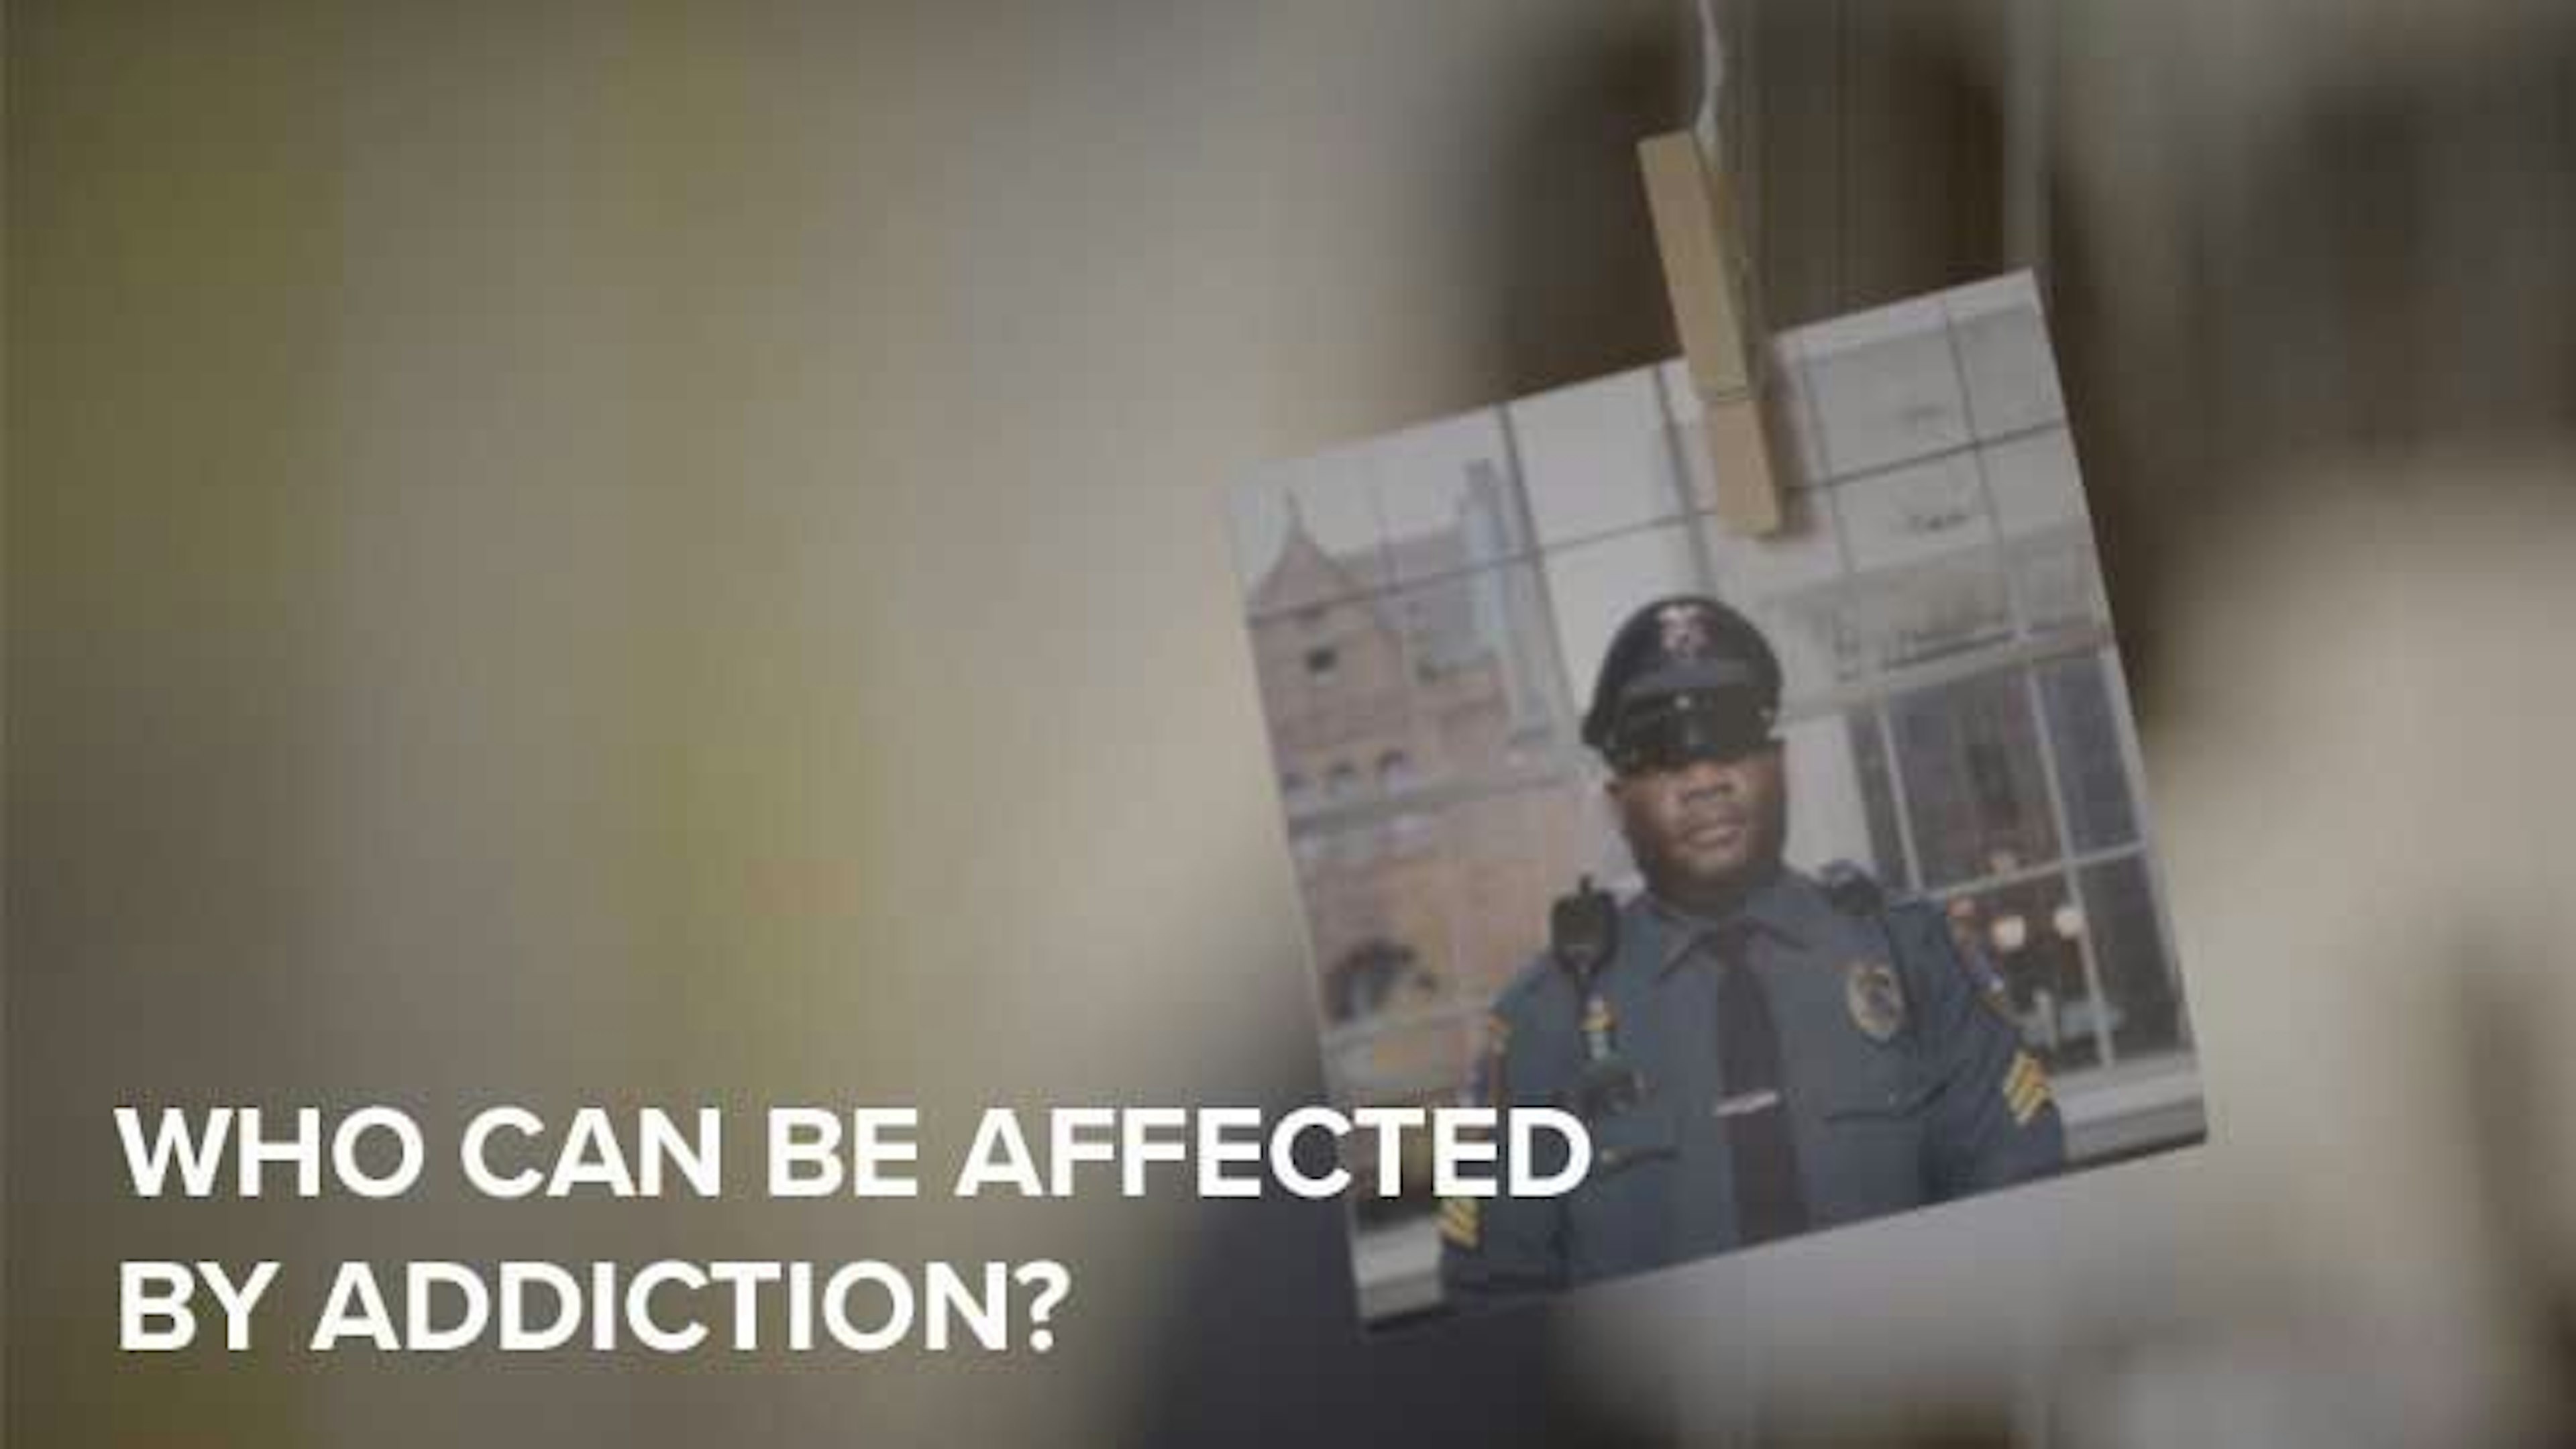 Who can be affected by addiction?